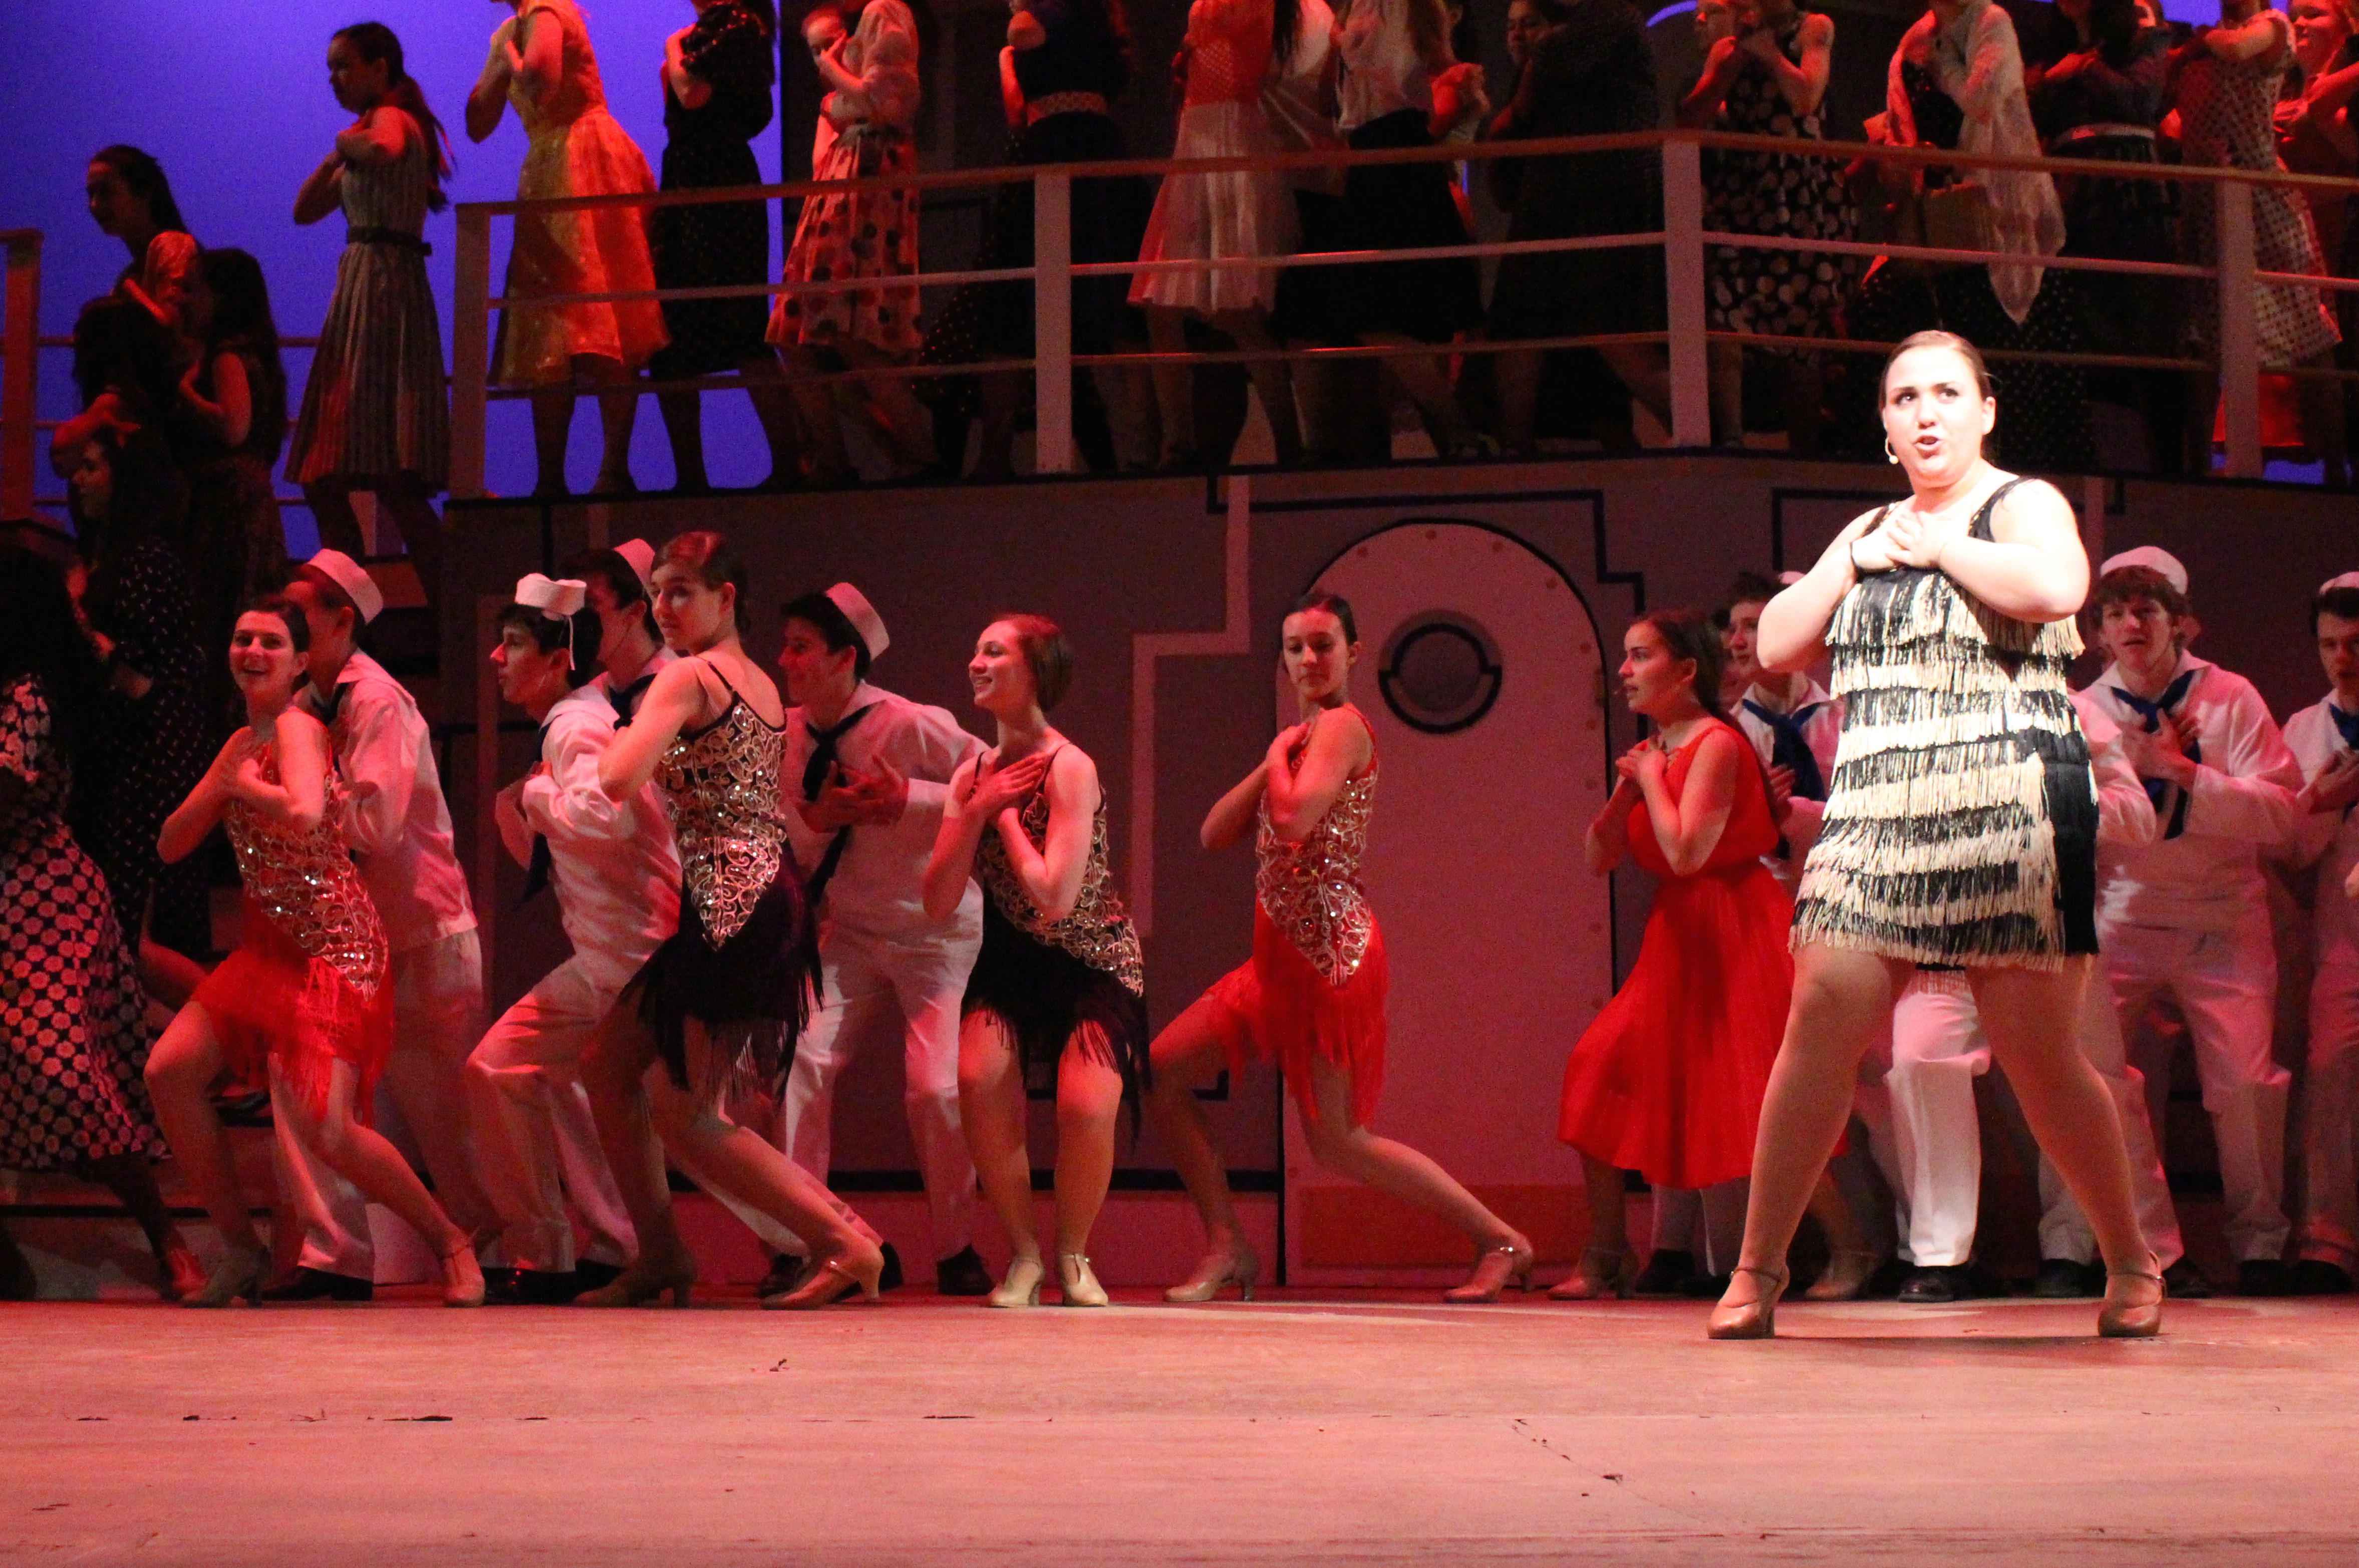 High School Play "Anything Goes"